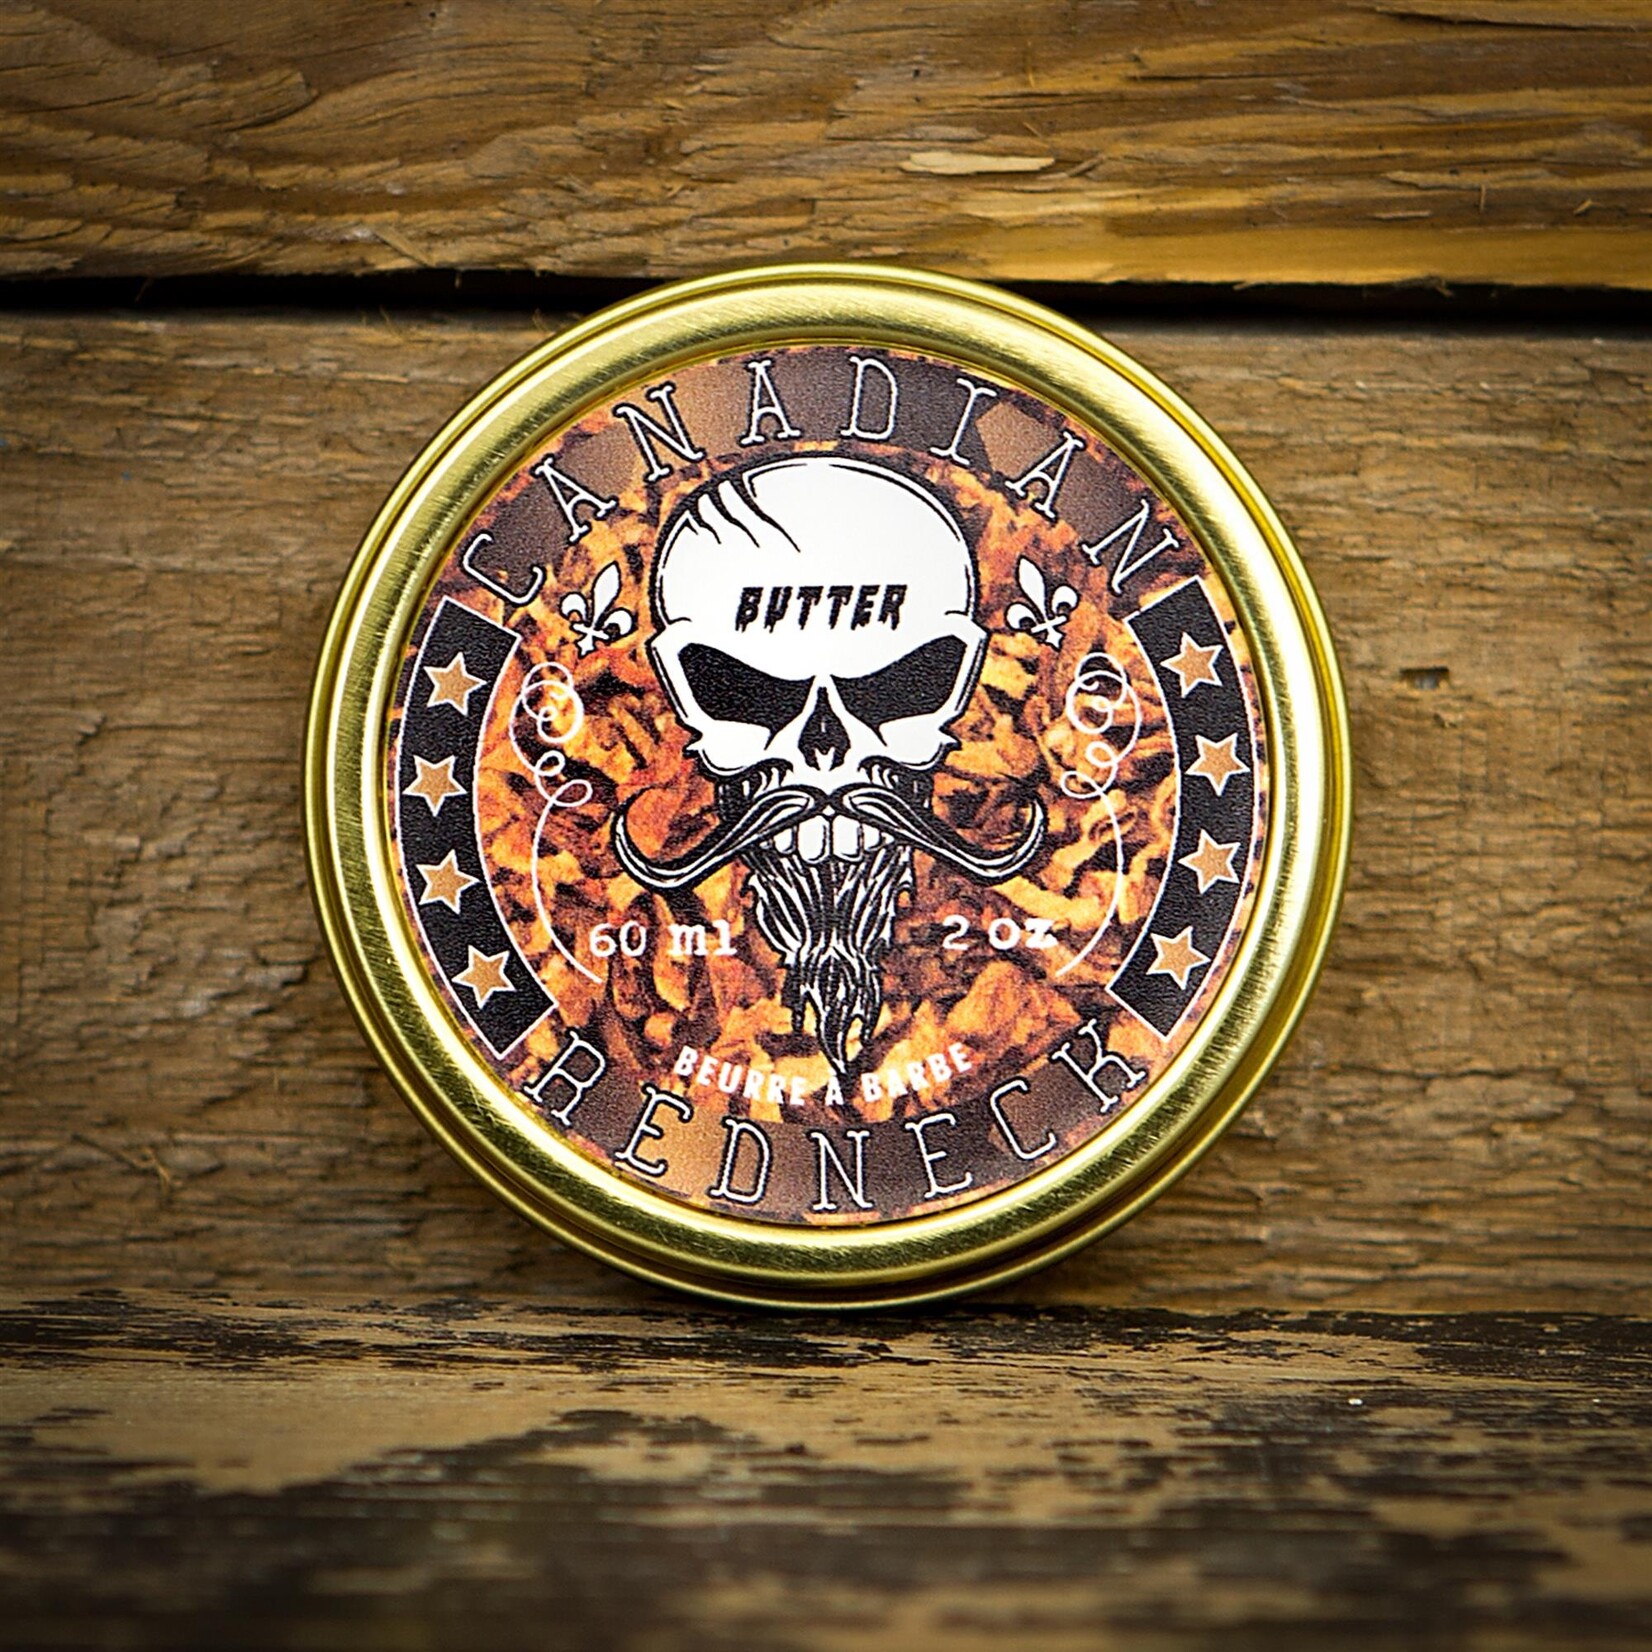 CANADIAN REDNECK Beurre à Barbe Hell Tacobacco 60ml